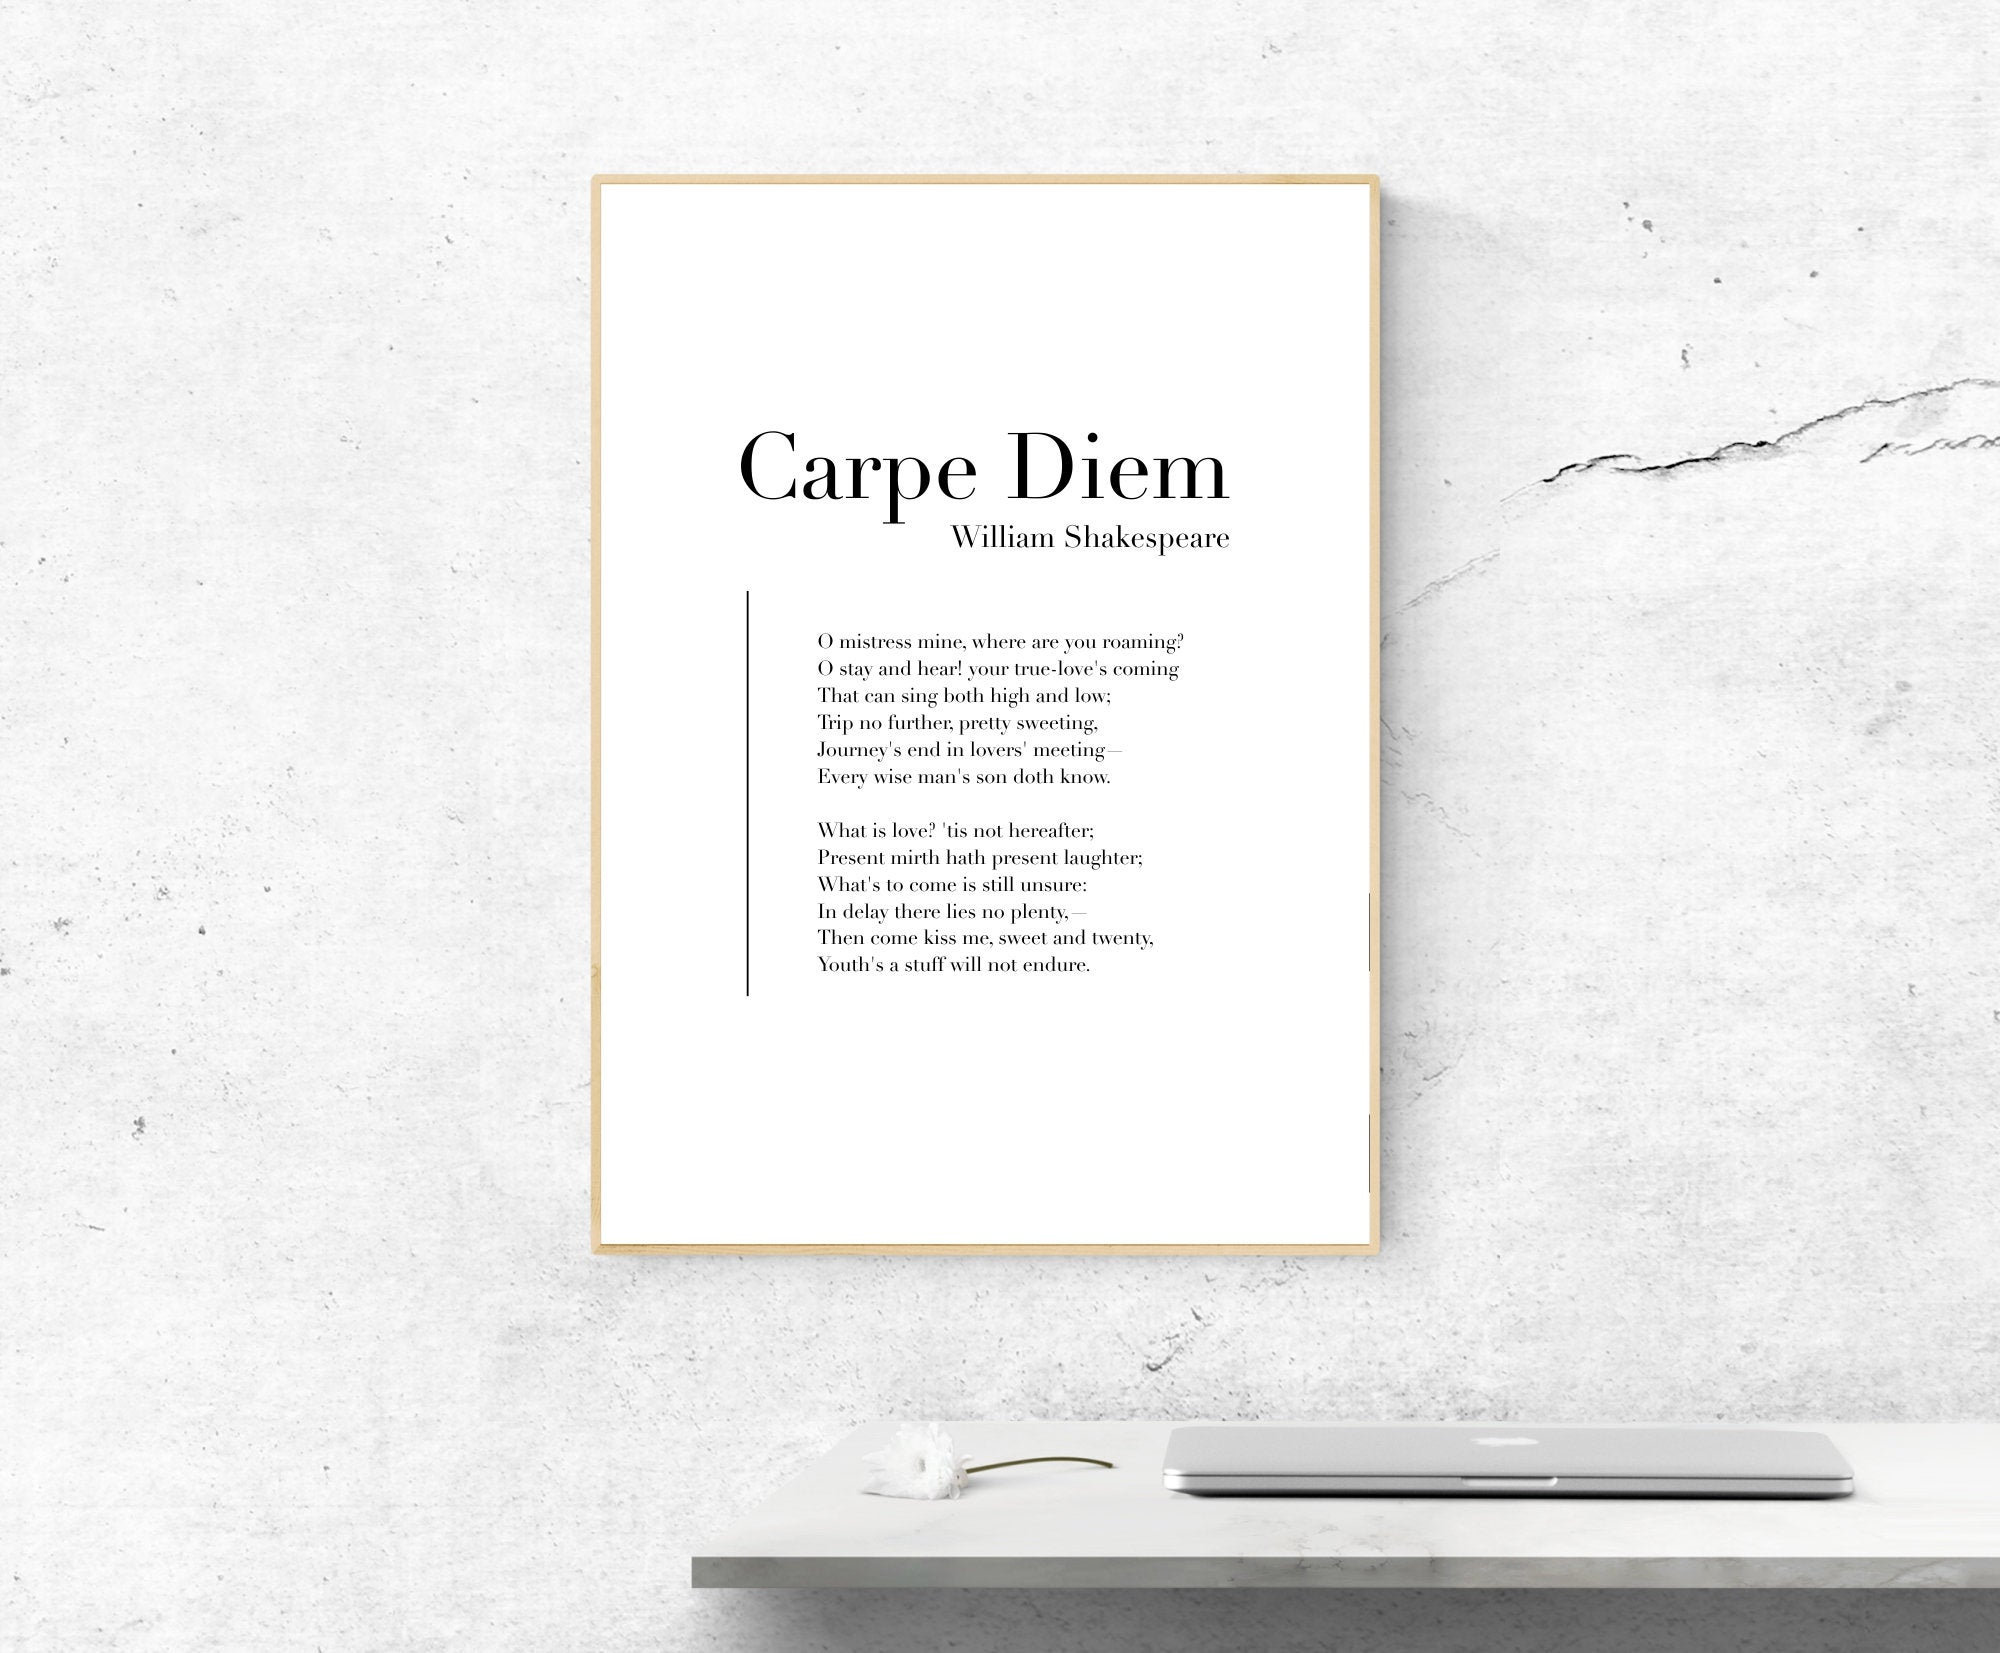 what is carpe diem by robert frost about